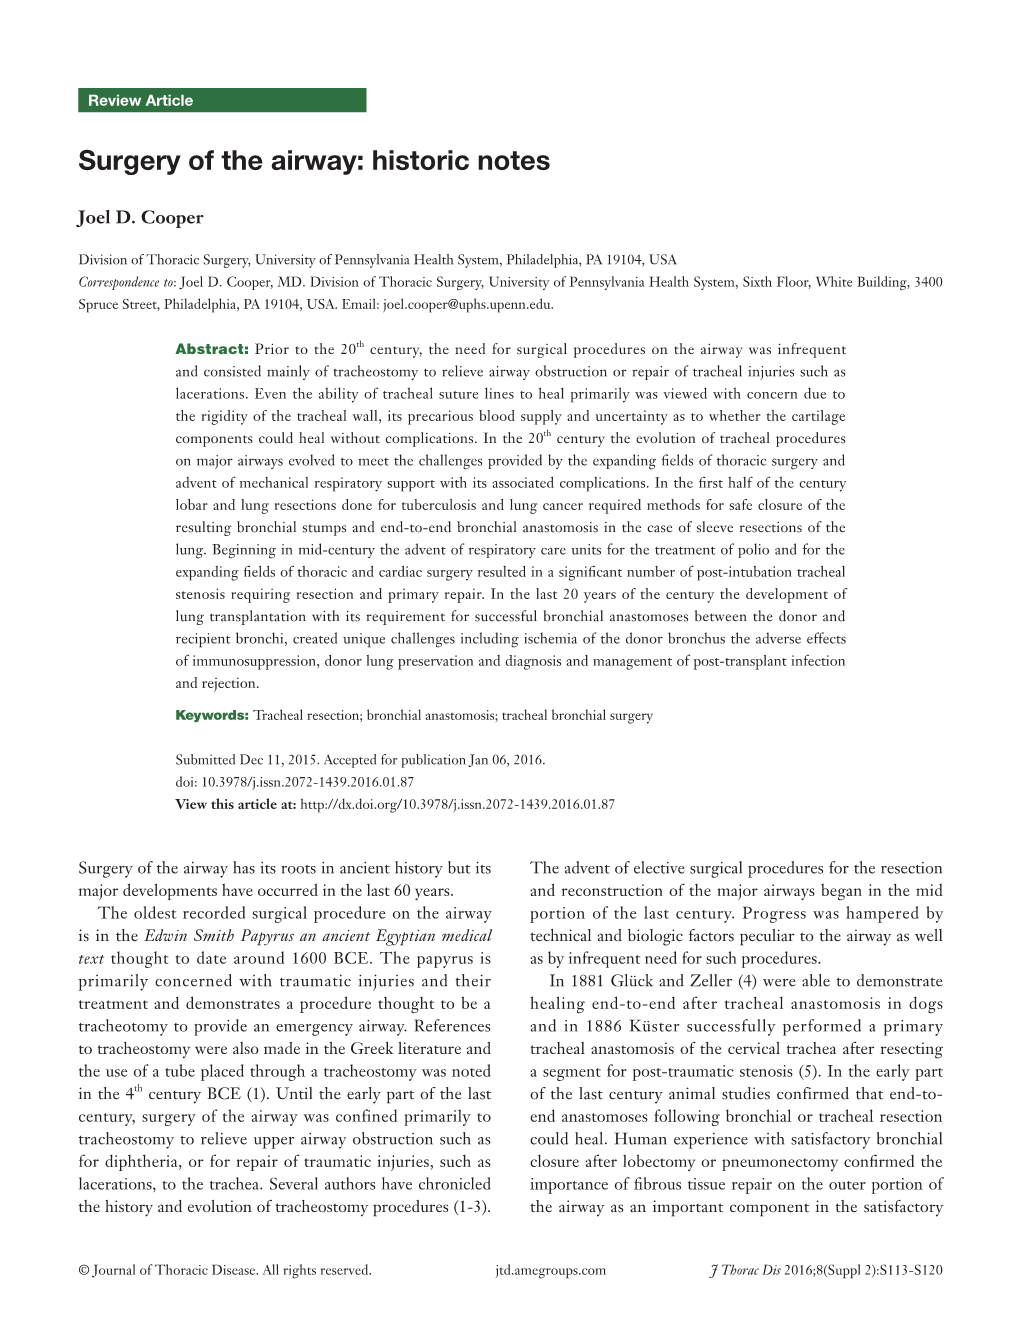 Surgery of the Airway: Historic Notes